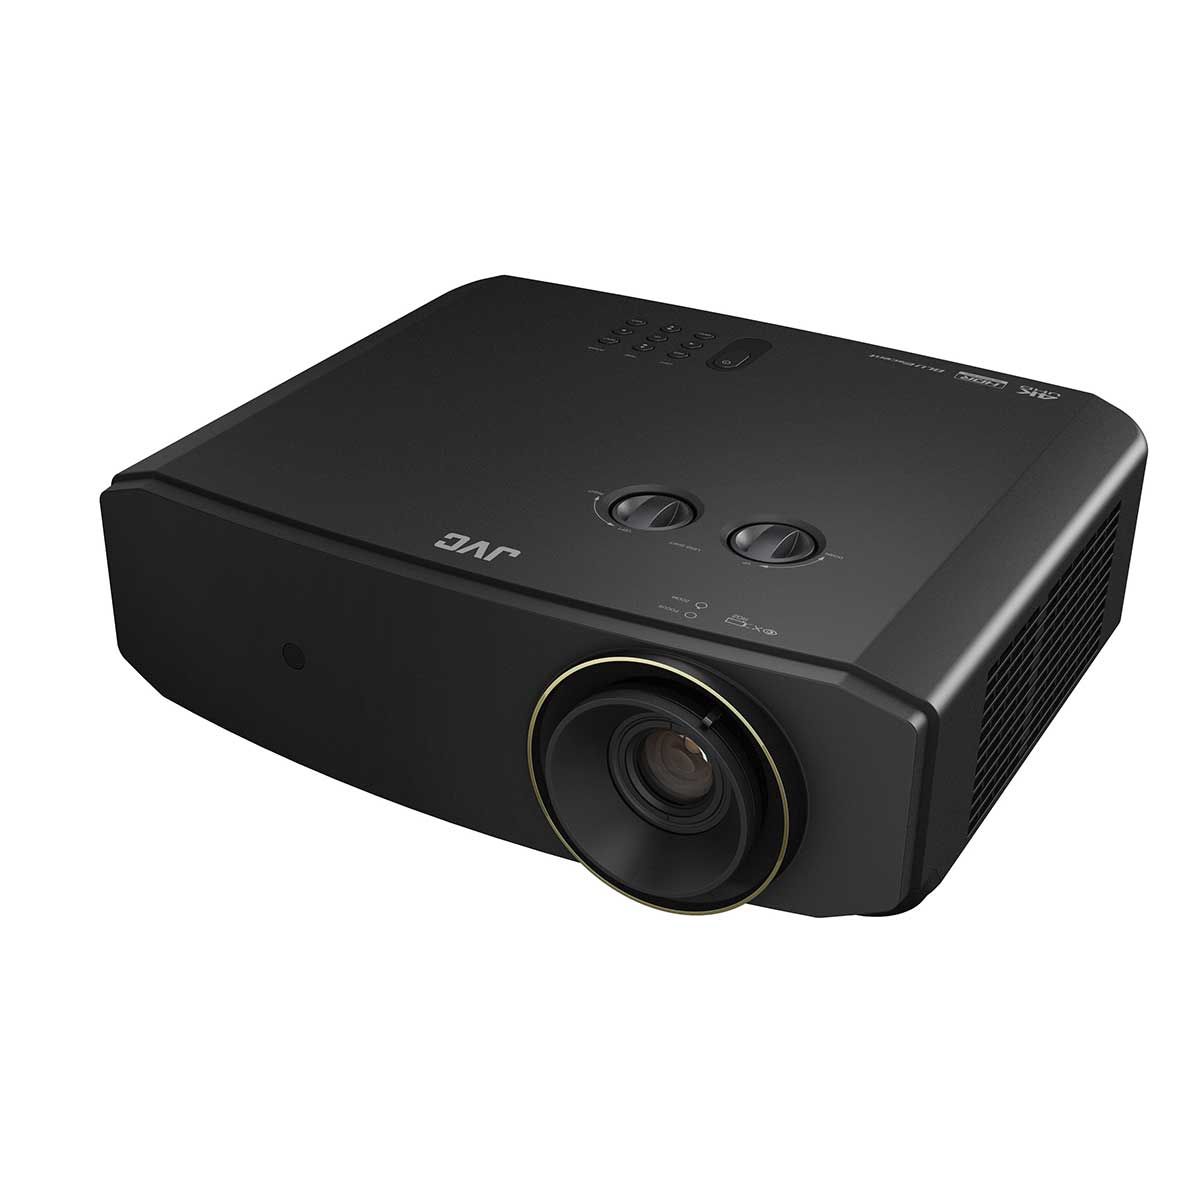 angled view of JVC LX-NZ3 home theater projector in black color